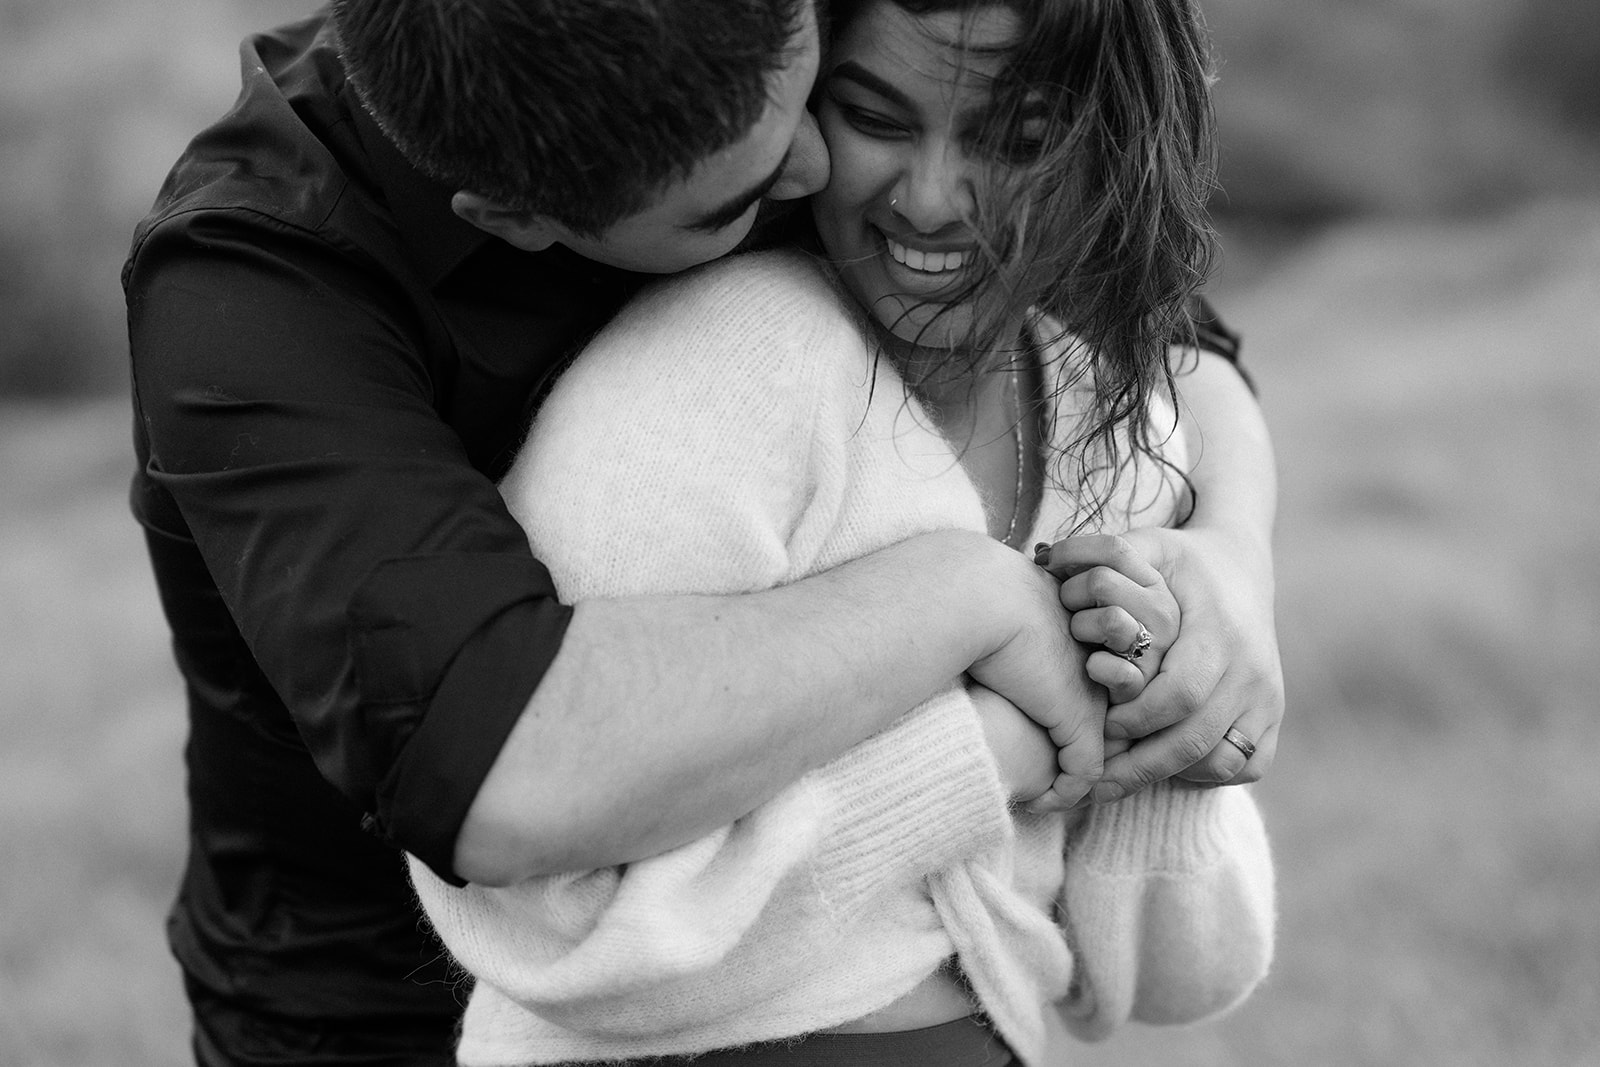 Pre-wedding photoshoot in Mornington, the couple embraces each other tenderly, finding comfort and warmth in each other'